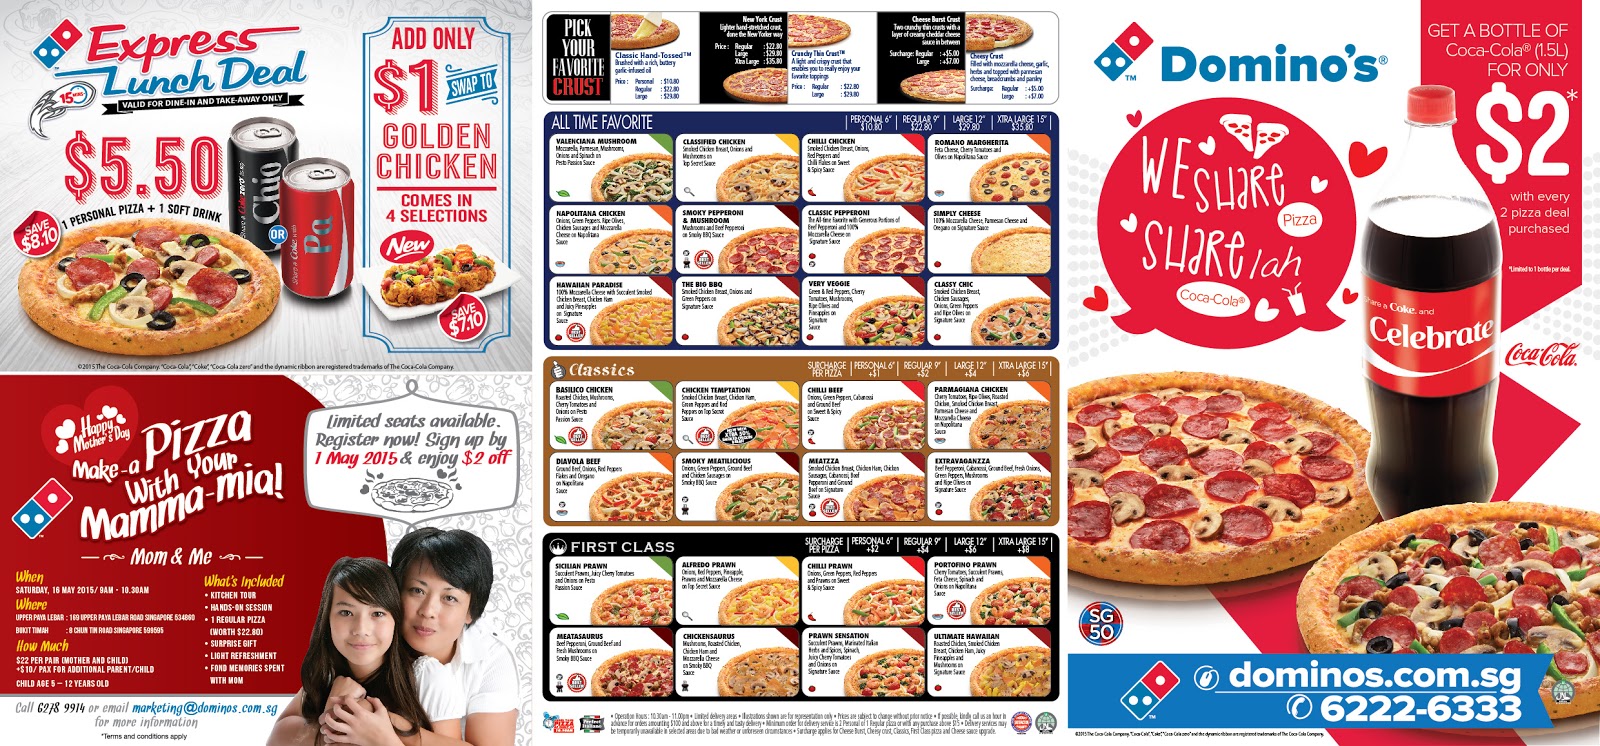 Domino's Pizza Delivery Deals and Express Lunch Promo! - Tal